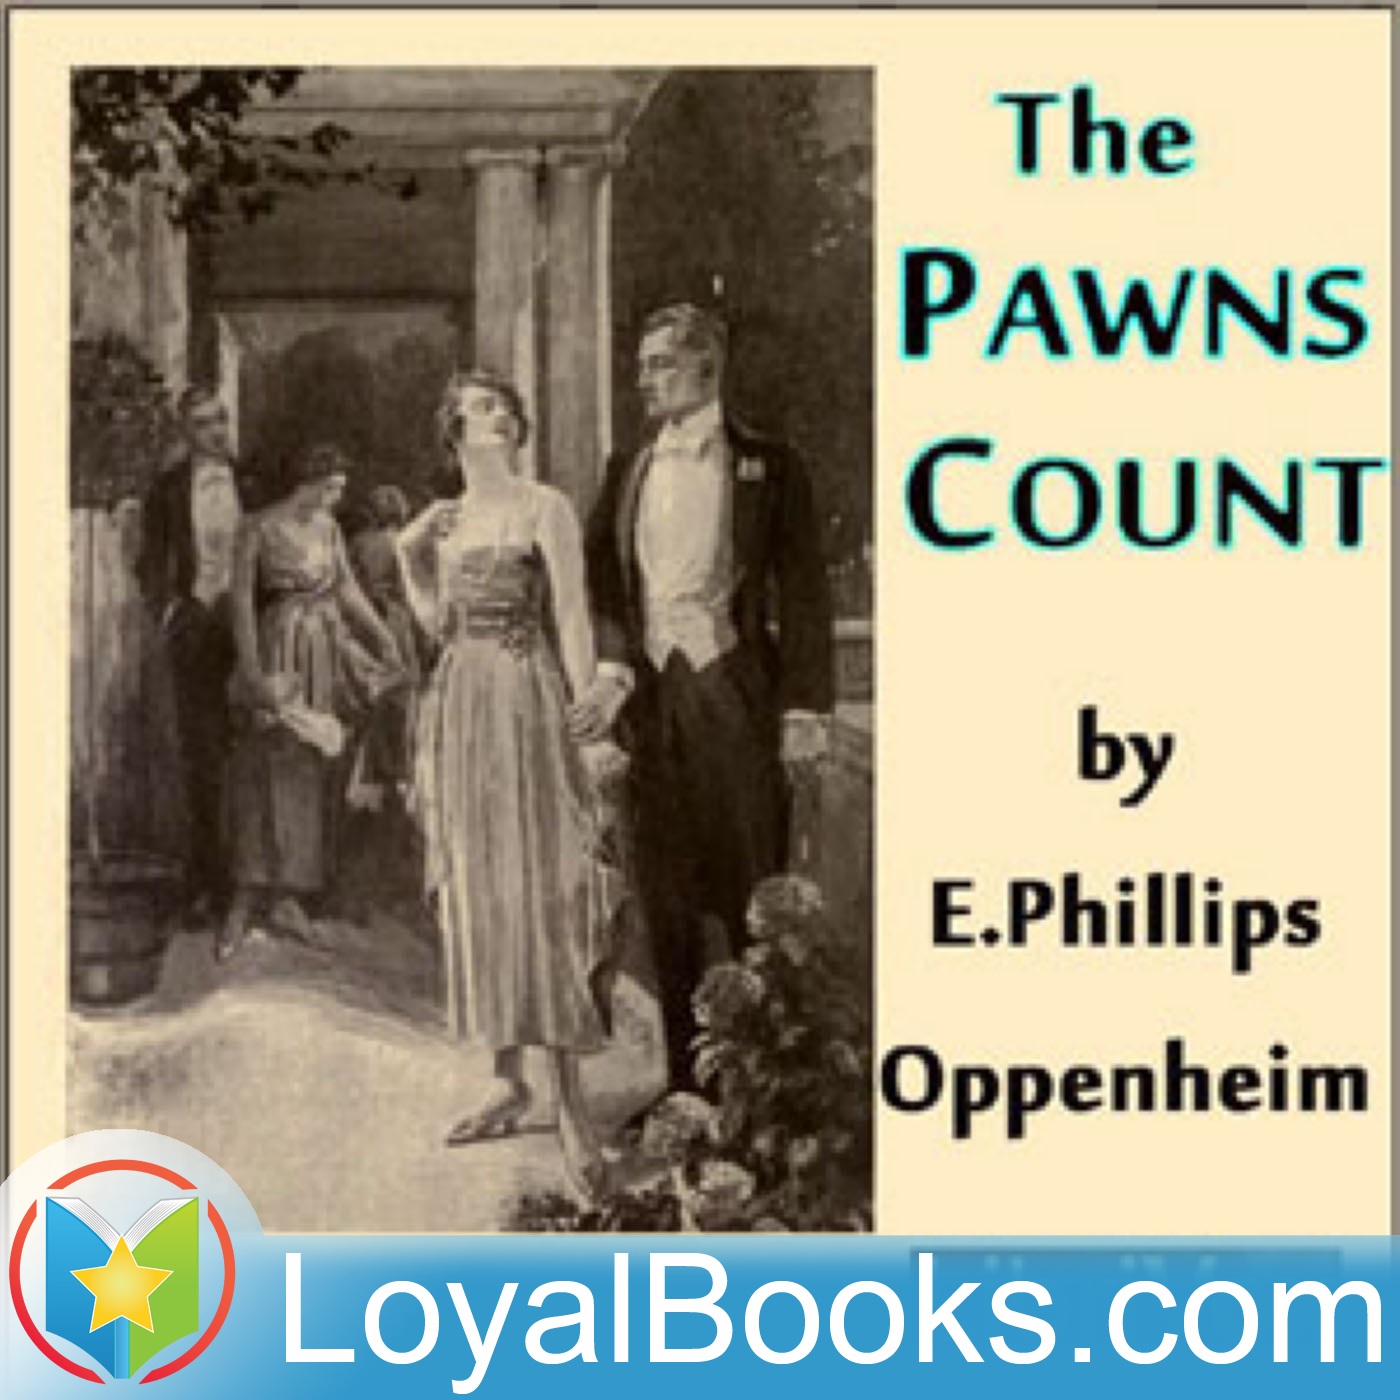 The Pawns Count by Edward Phillips Oppenheim